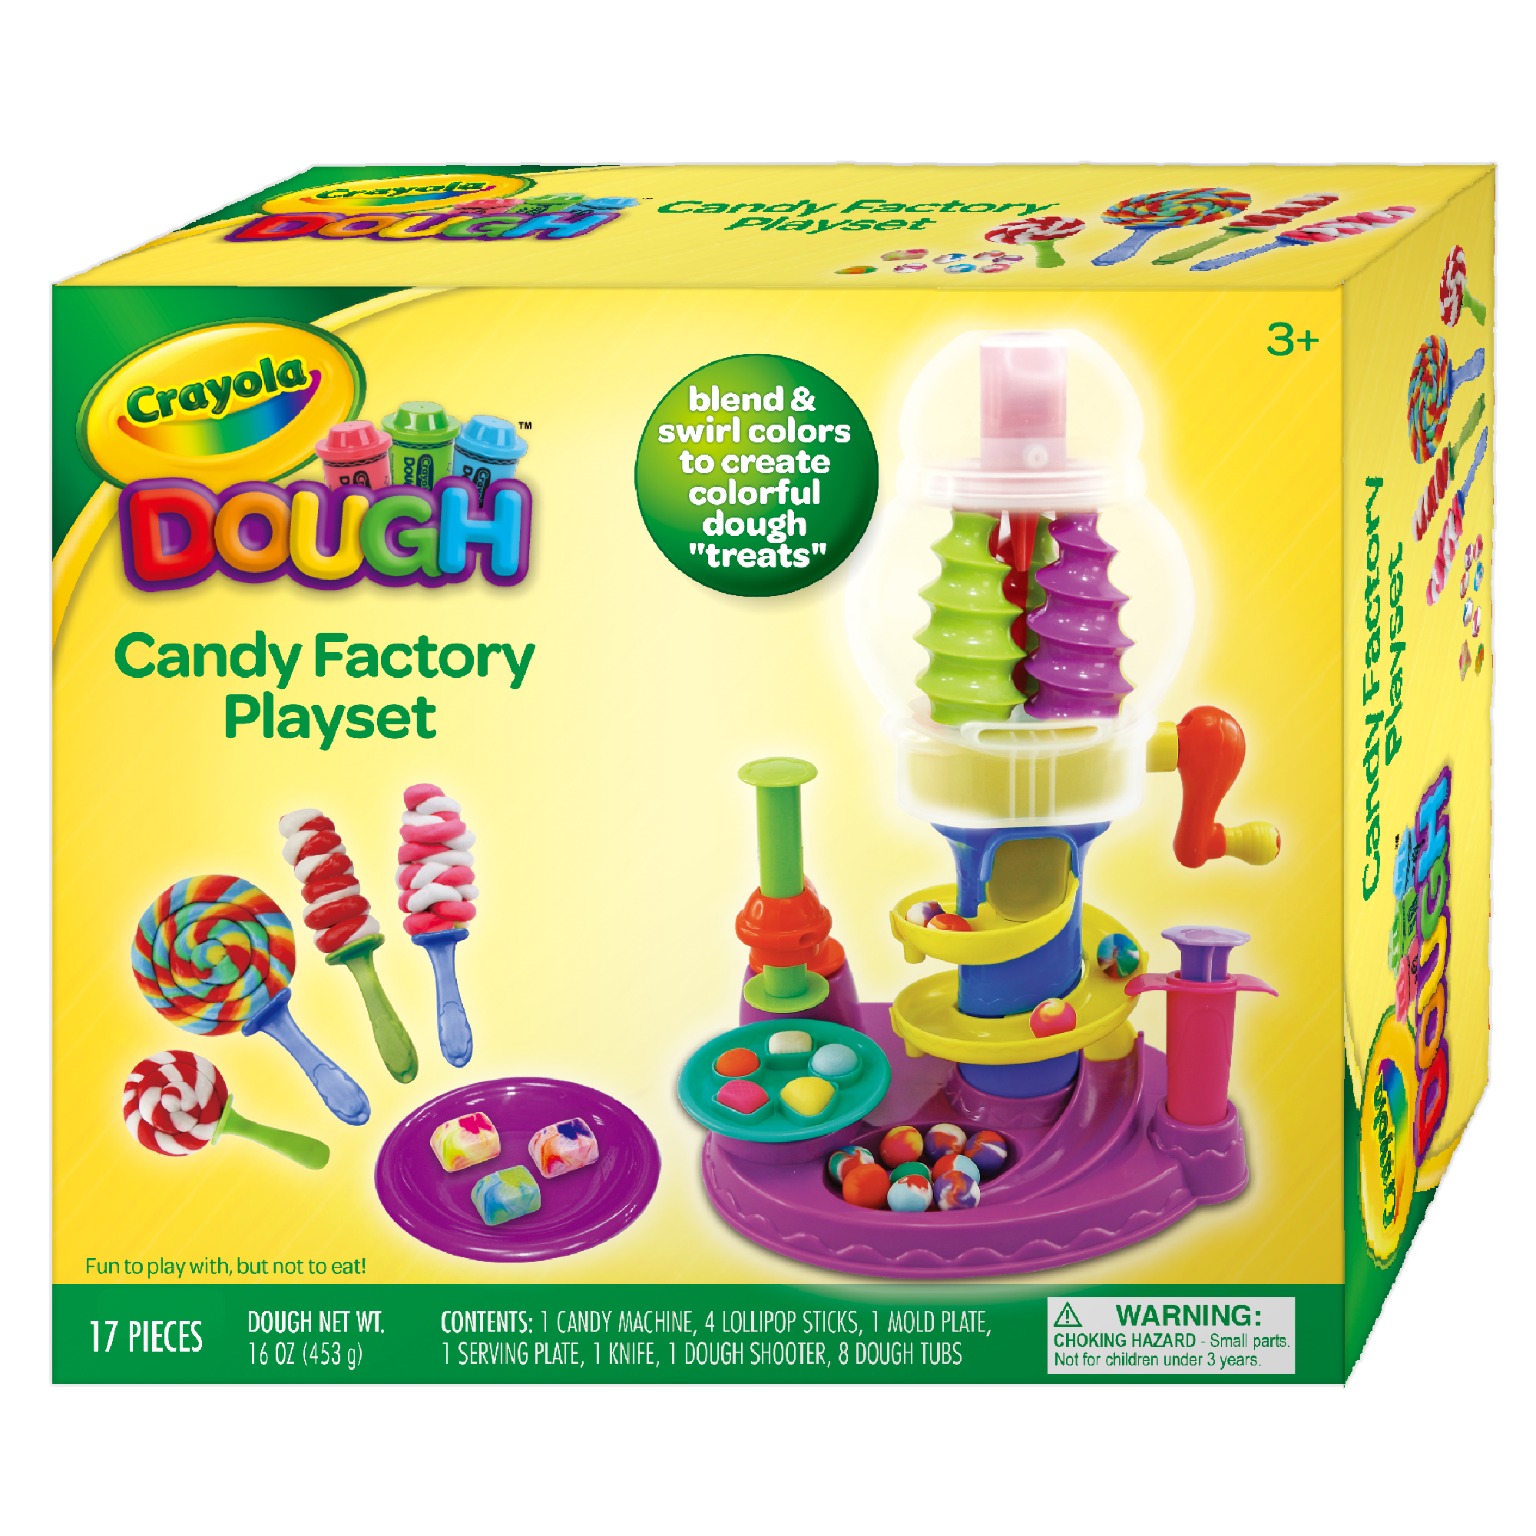 Play Doh Fun Tub Playset, Starter Set for Kids with Storage, 18 Tools, 5  Non-Toxic Colors, Preschool Toys, Easter Crafts, Ages 3+ ( Exclusive)